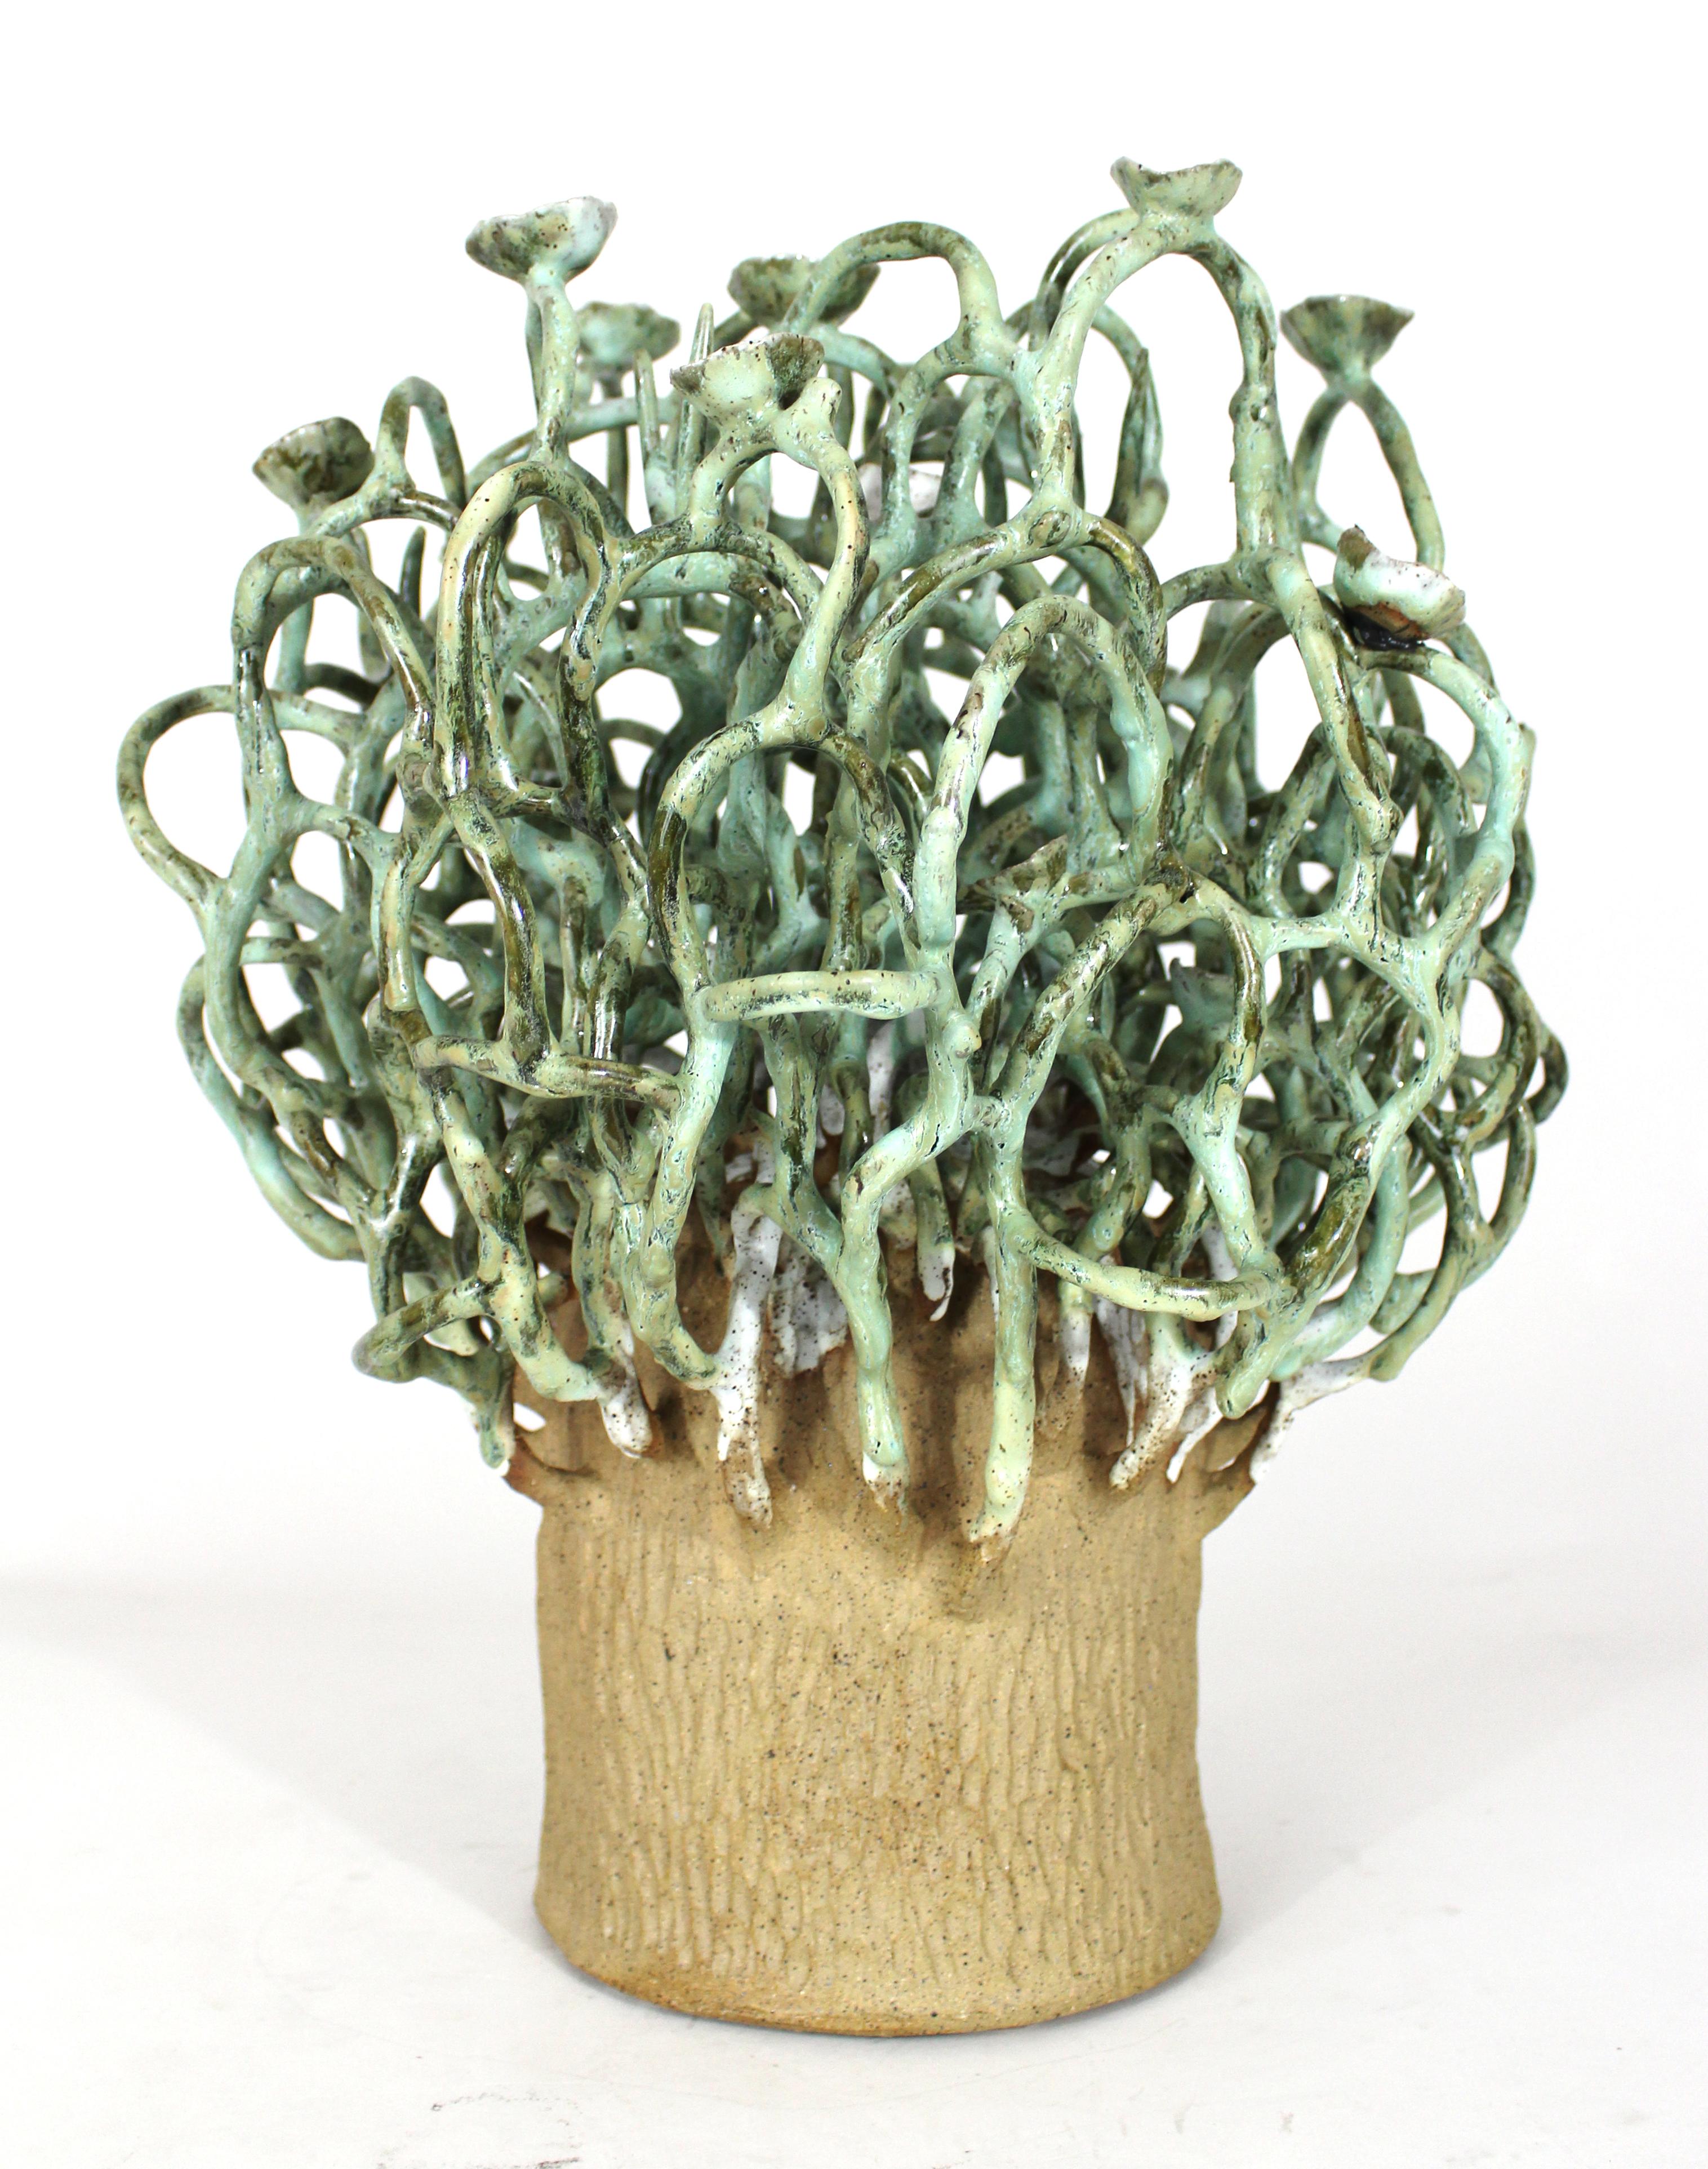 Contemporary Veil Sculpture in Glazed Ceramic by Trish DeMasi For Sale